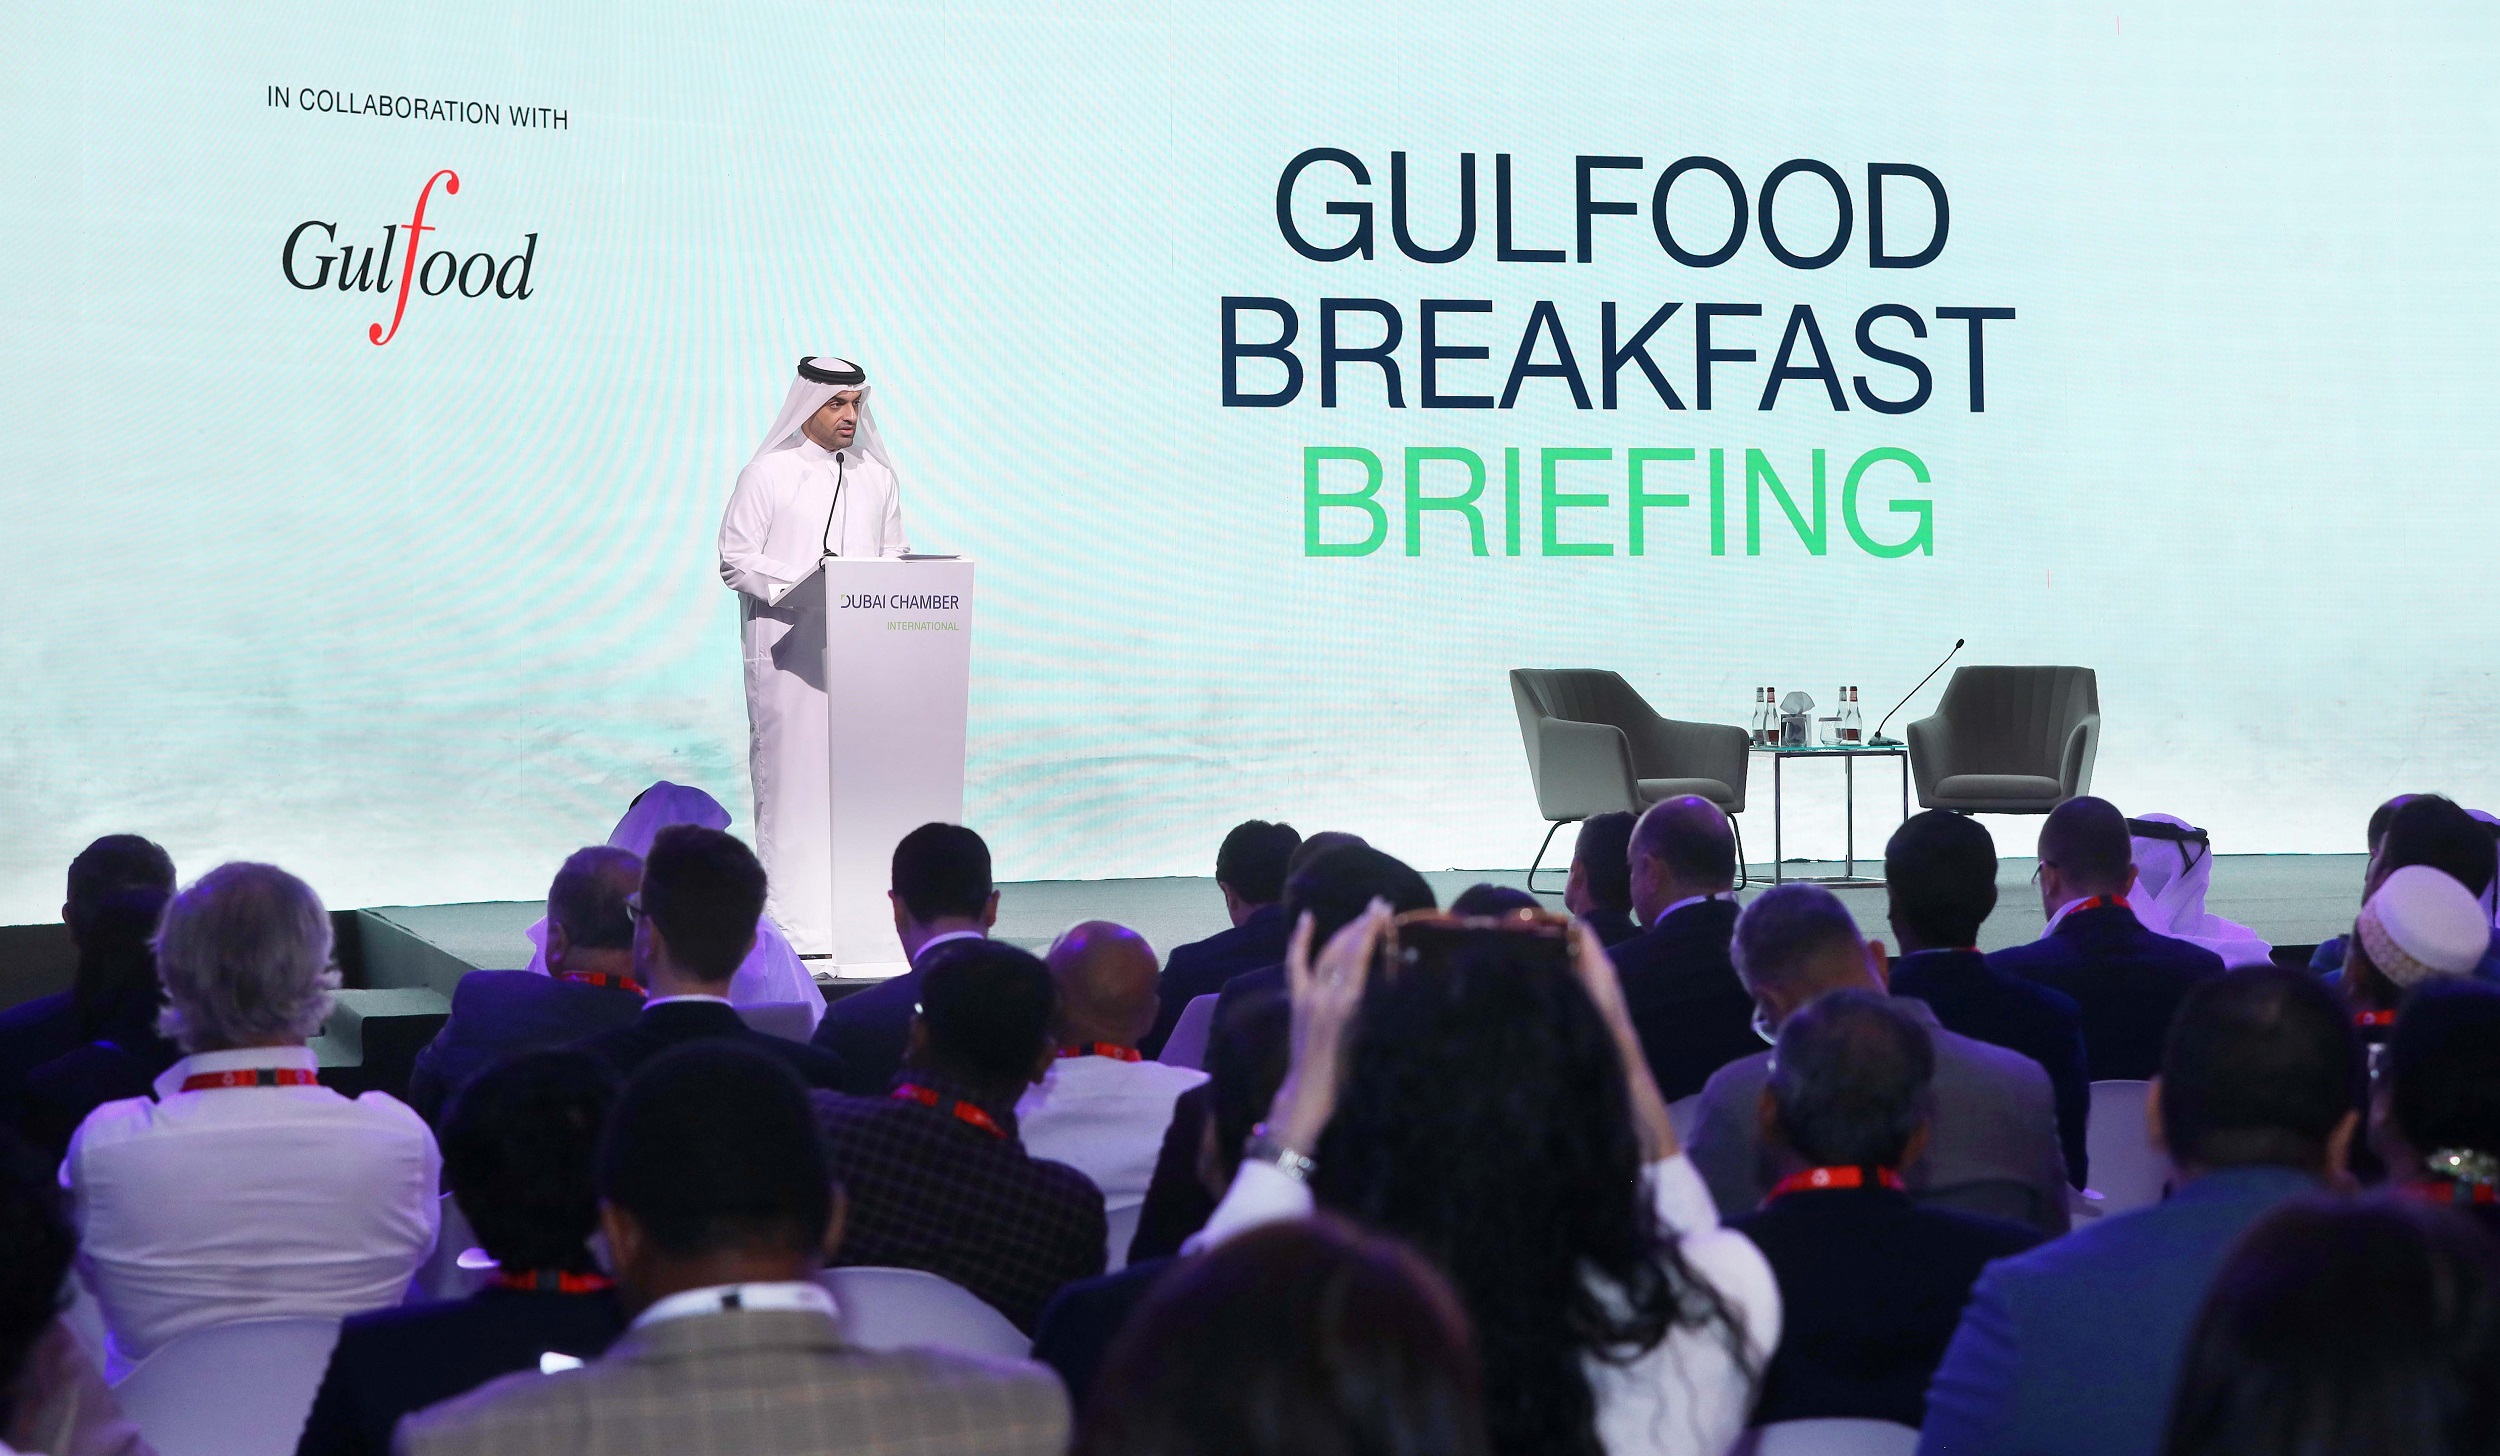 Dubai International Chamber highlights opportunities for growth in emirate’s vibrant F&B sector at Gulfood